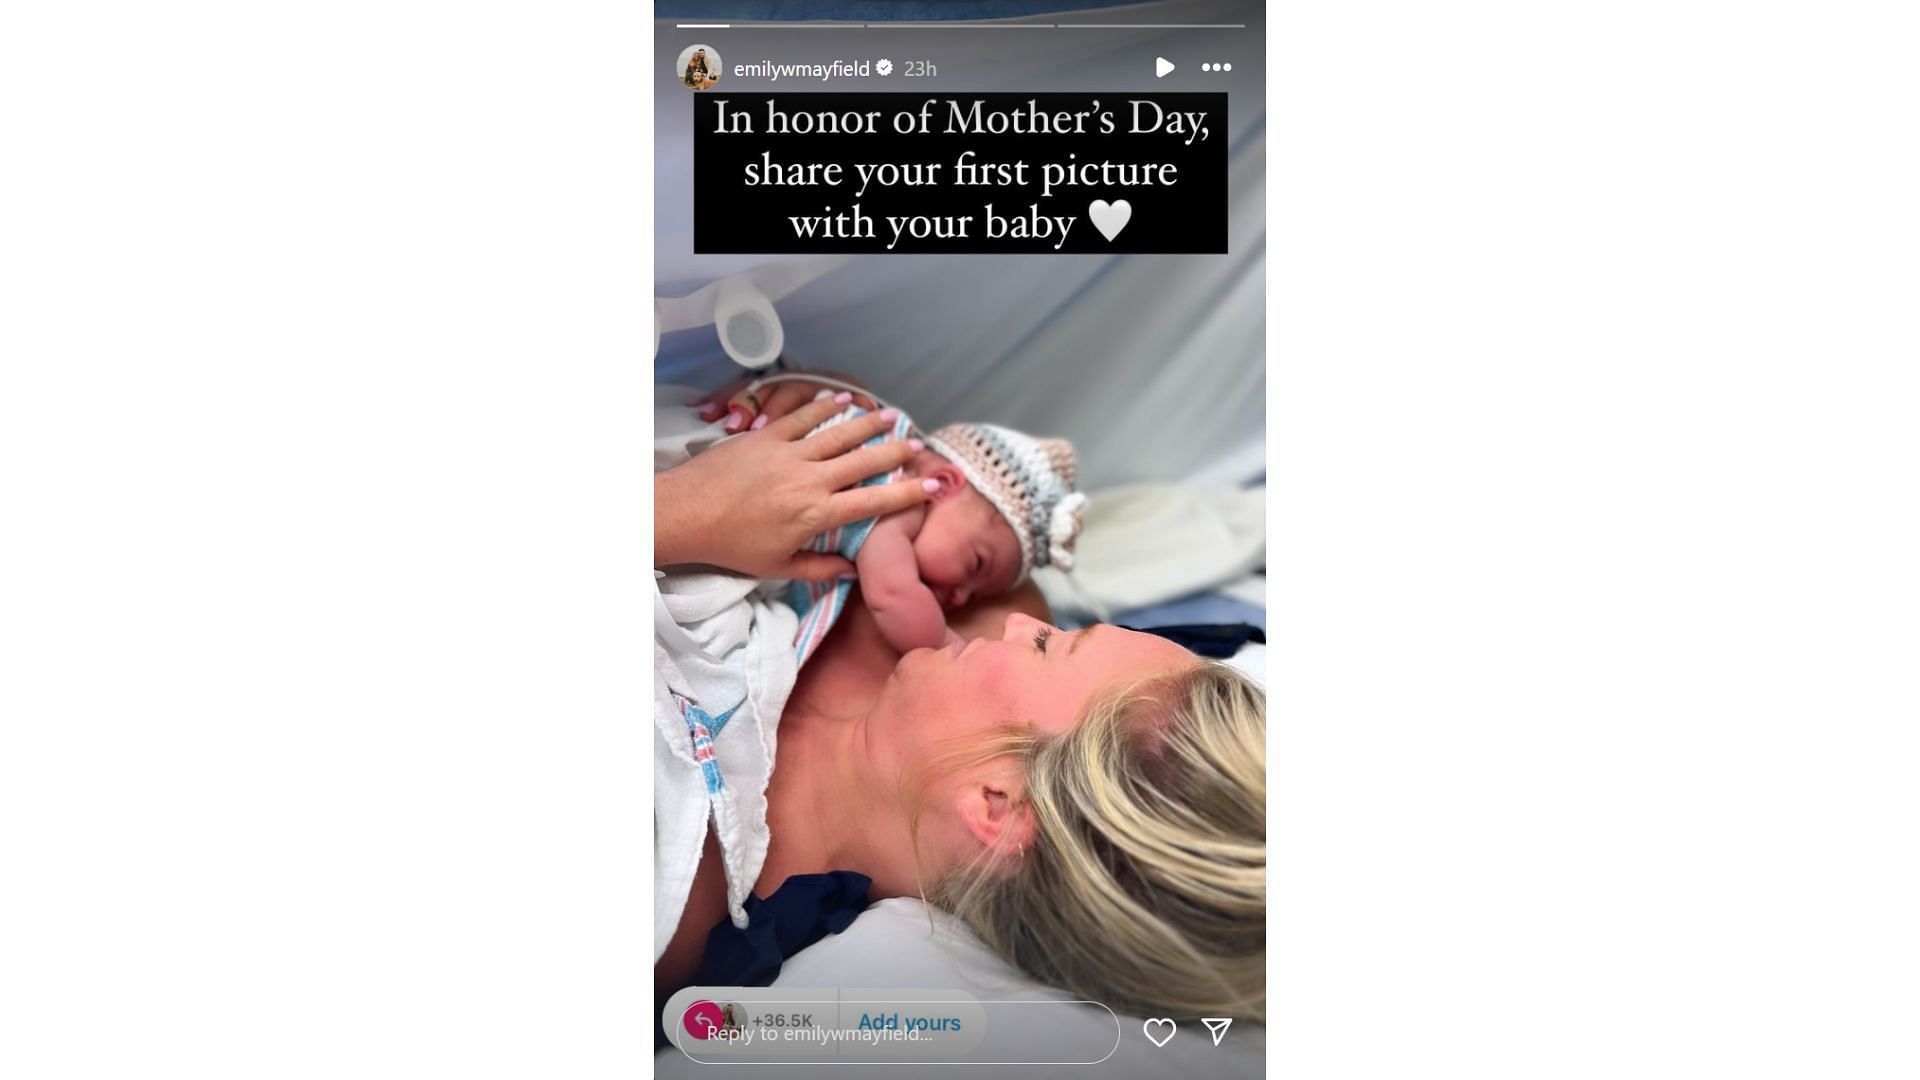 Baker Mayfield&#039;s wife Emily shares photo of baby girl Kova Jade on Mother&#039;s Day (From: @emilywmayfield)